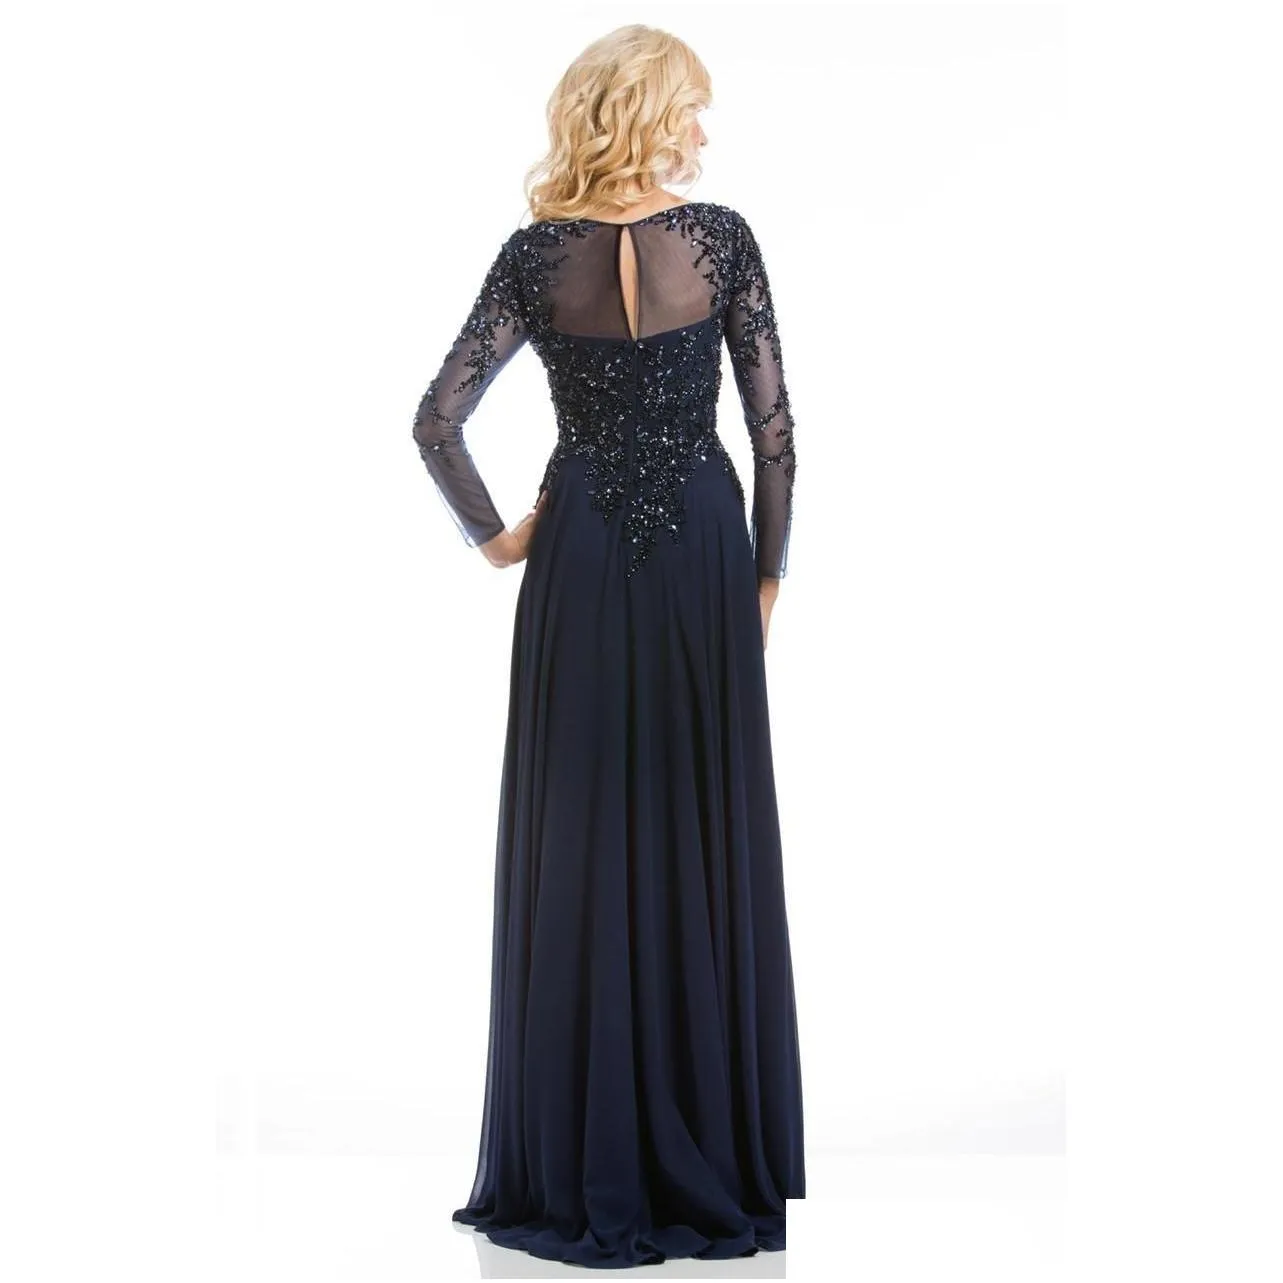 top selling elegant navy blue mother of the bride dresses chiffon seethrough long sleeve sheer neck appliques sequins evening dress